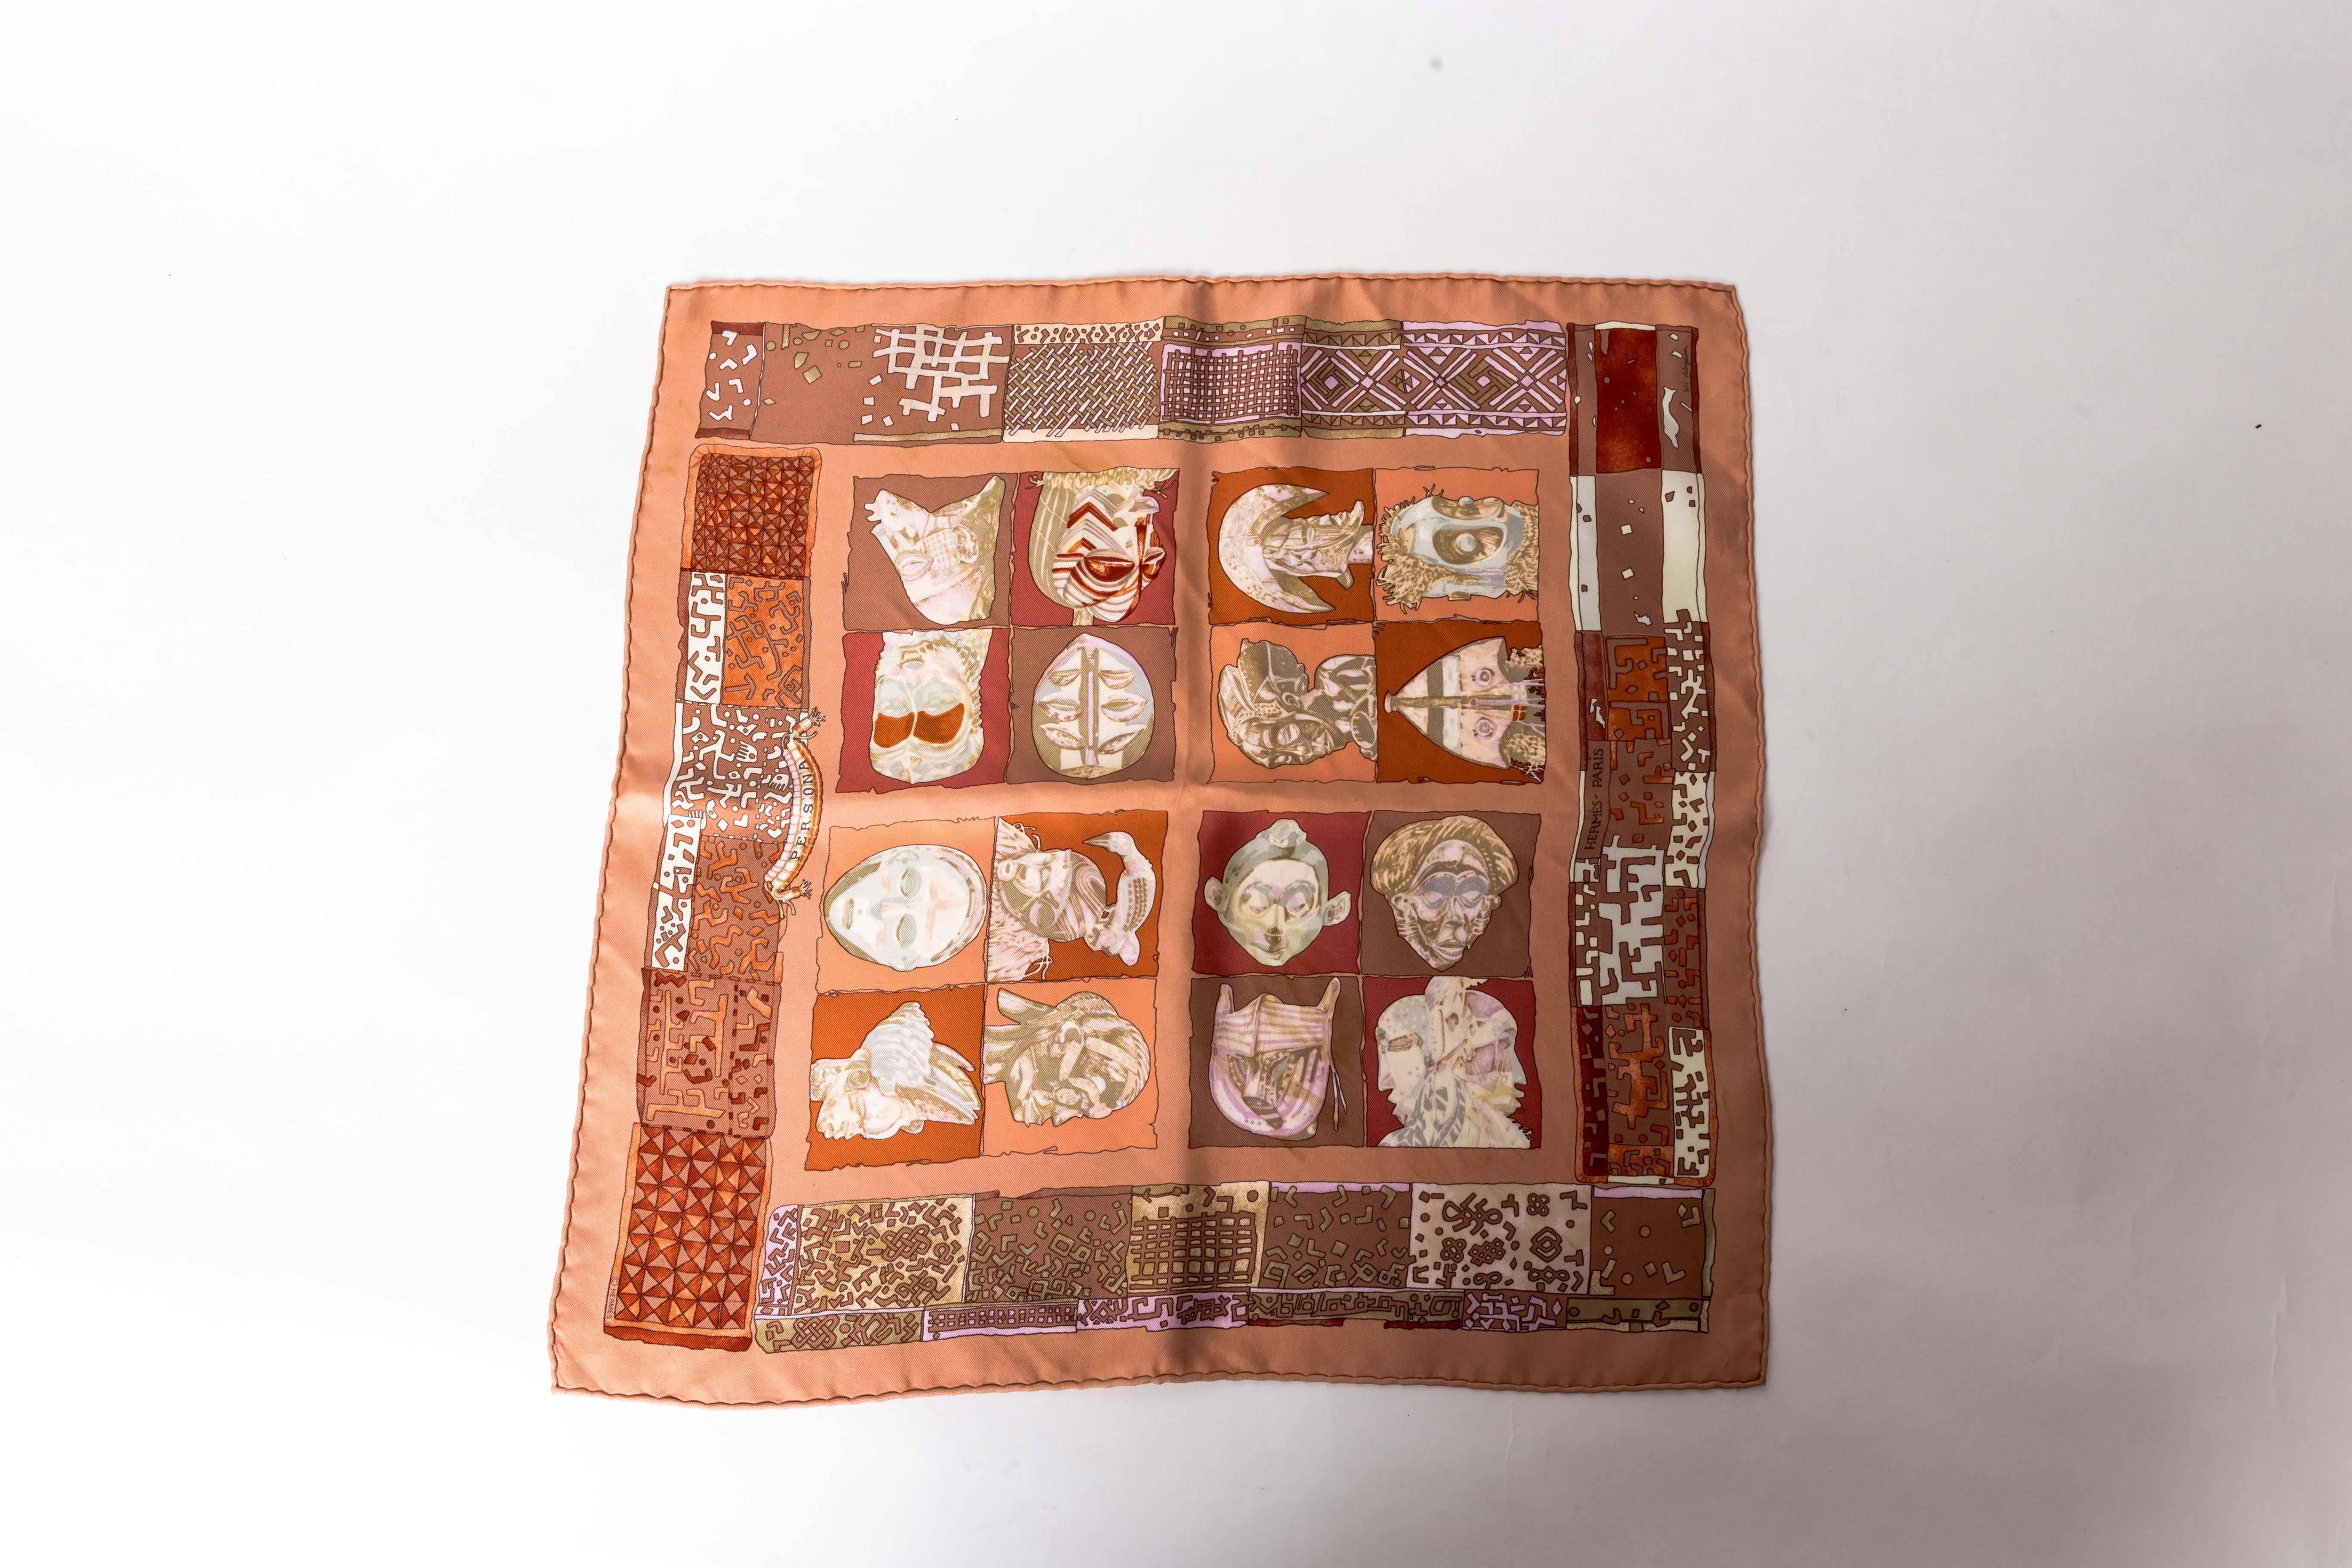 Lovely Hermes Pocket Square in Shdes of nude and terracotta.
Titled Persona this silk pocket square is stamped Hermes Paris and features sixteen heads within a border of geometric patterns. 
Lois Dubigeon is the artist behind this silk scarf and her